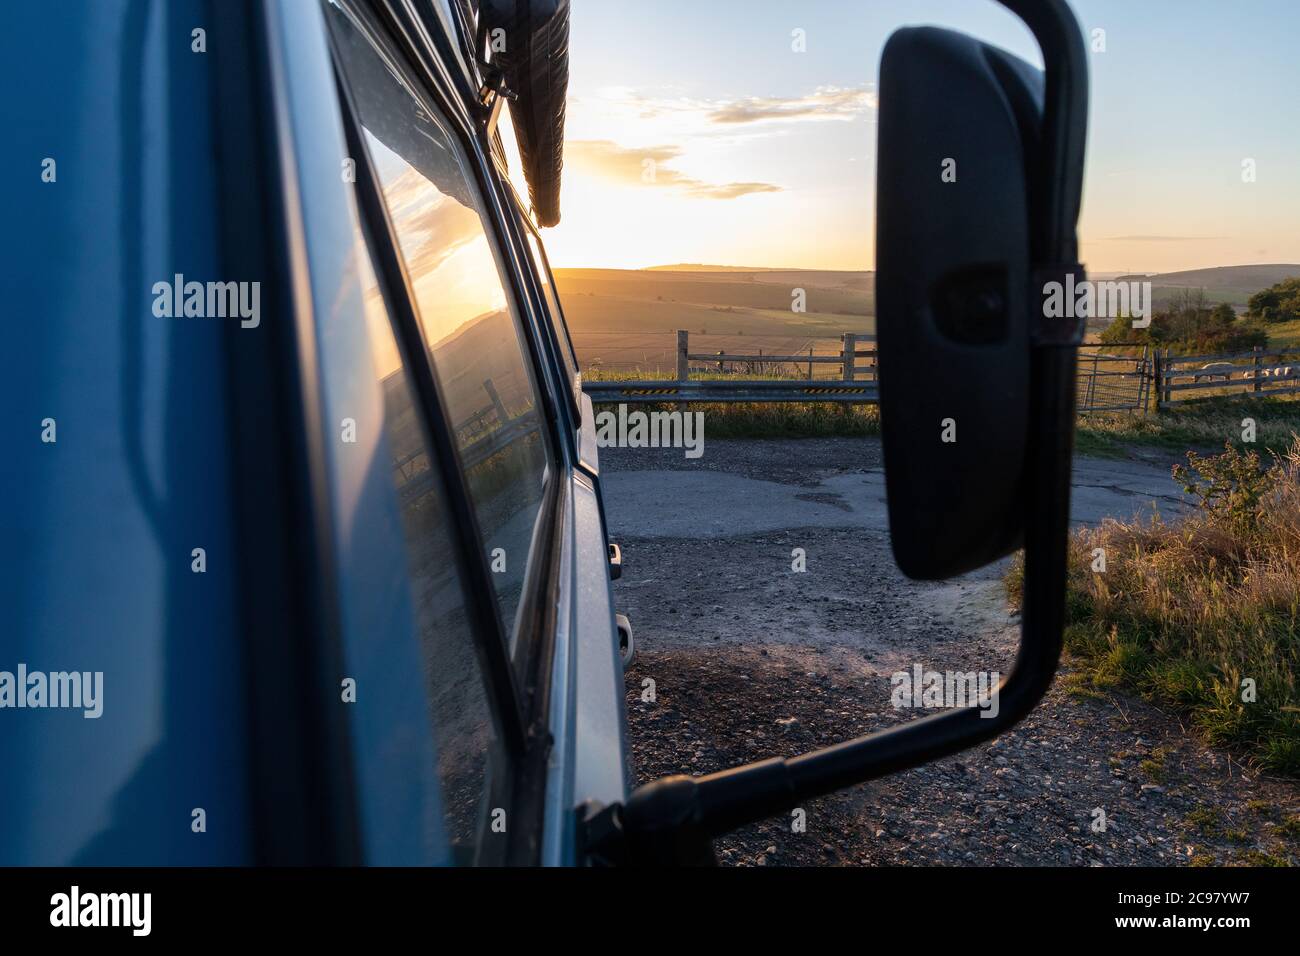 My Volkswagen camper at sunset. Stock Photo